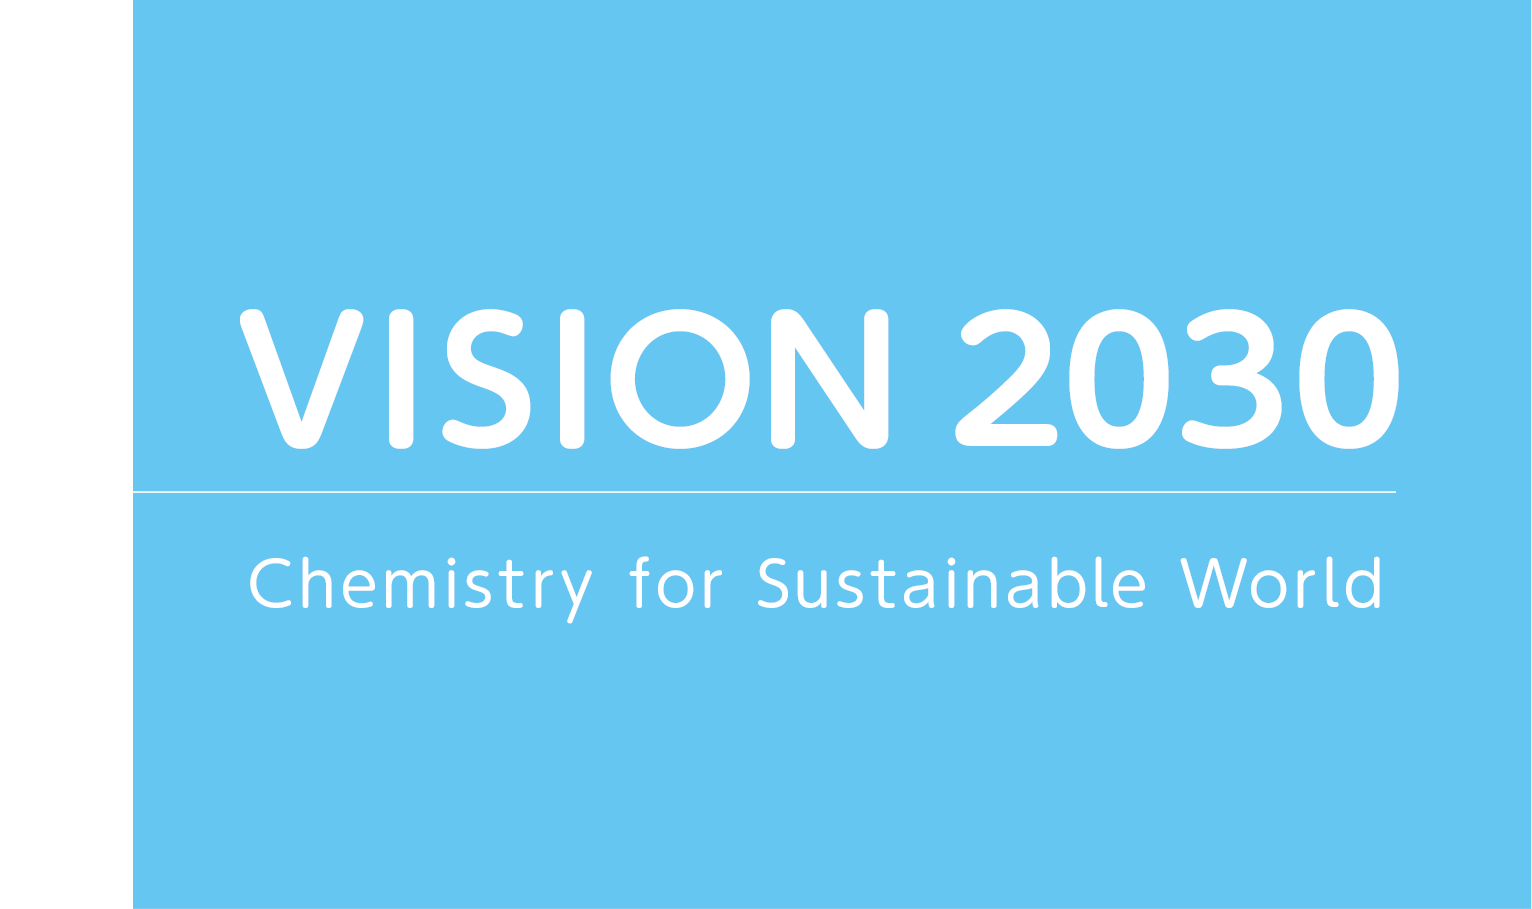 VISION 2030 Chemistry for Sustainable World